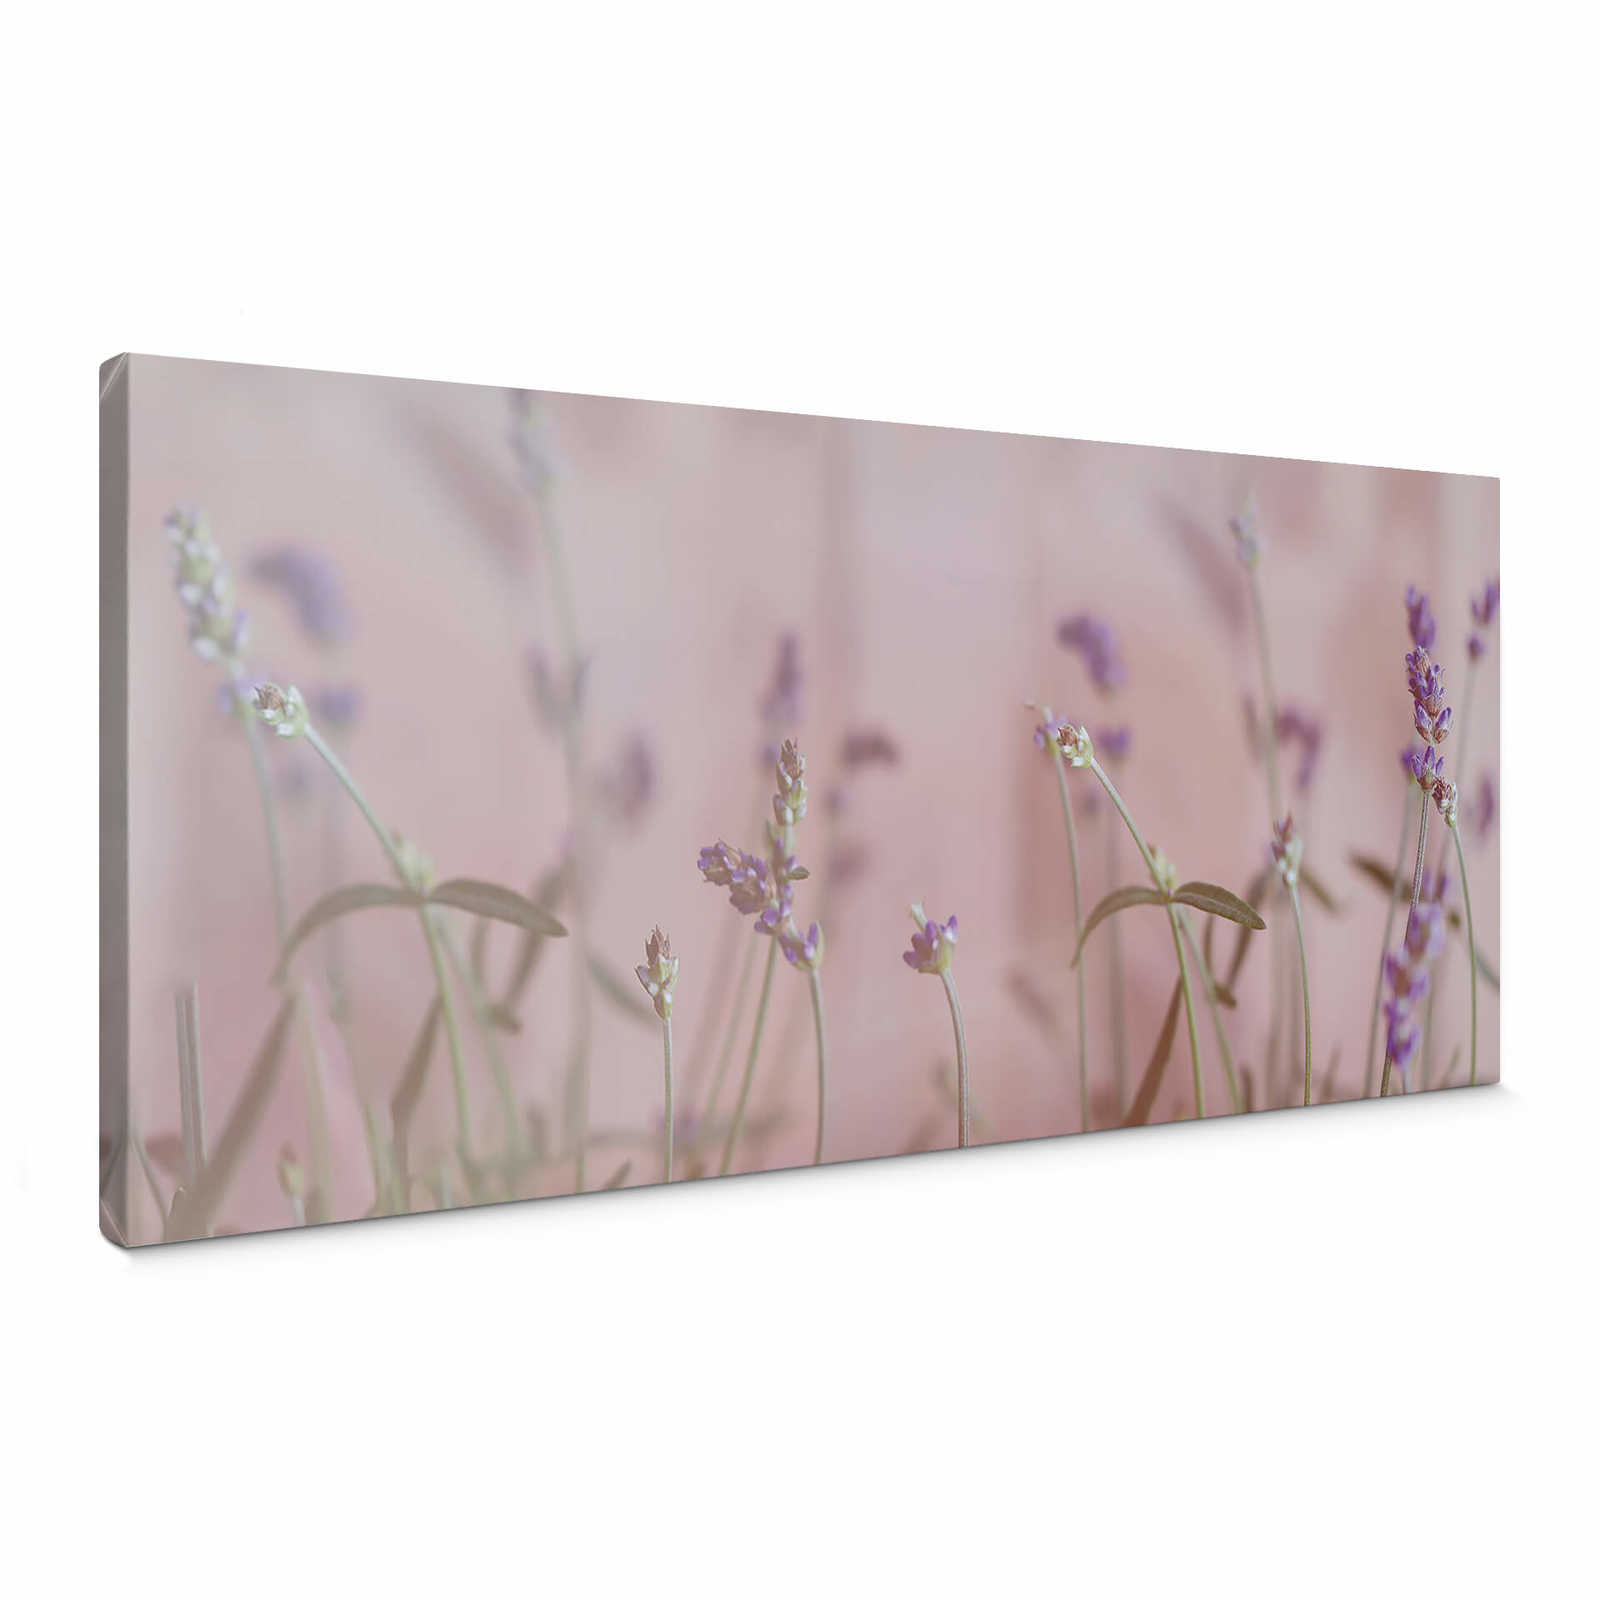         Panoramic print flower meadow with lavender blossoms
    